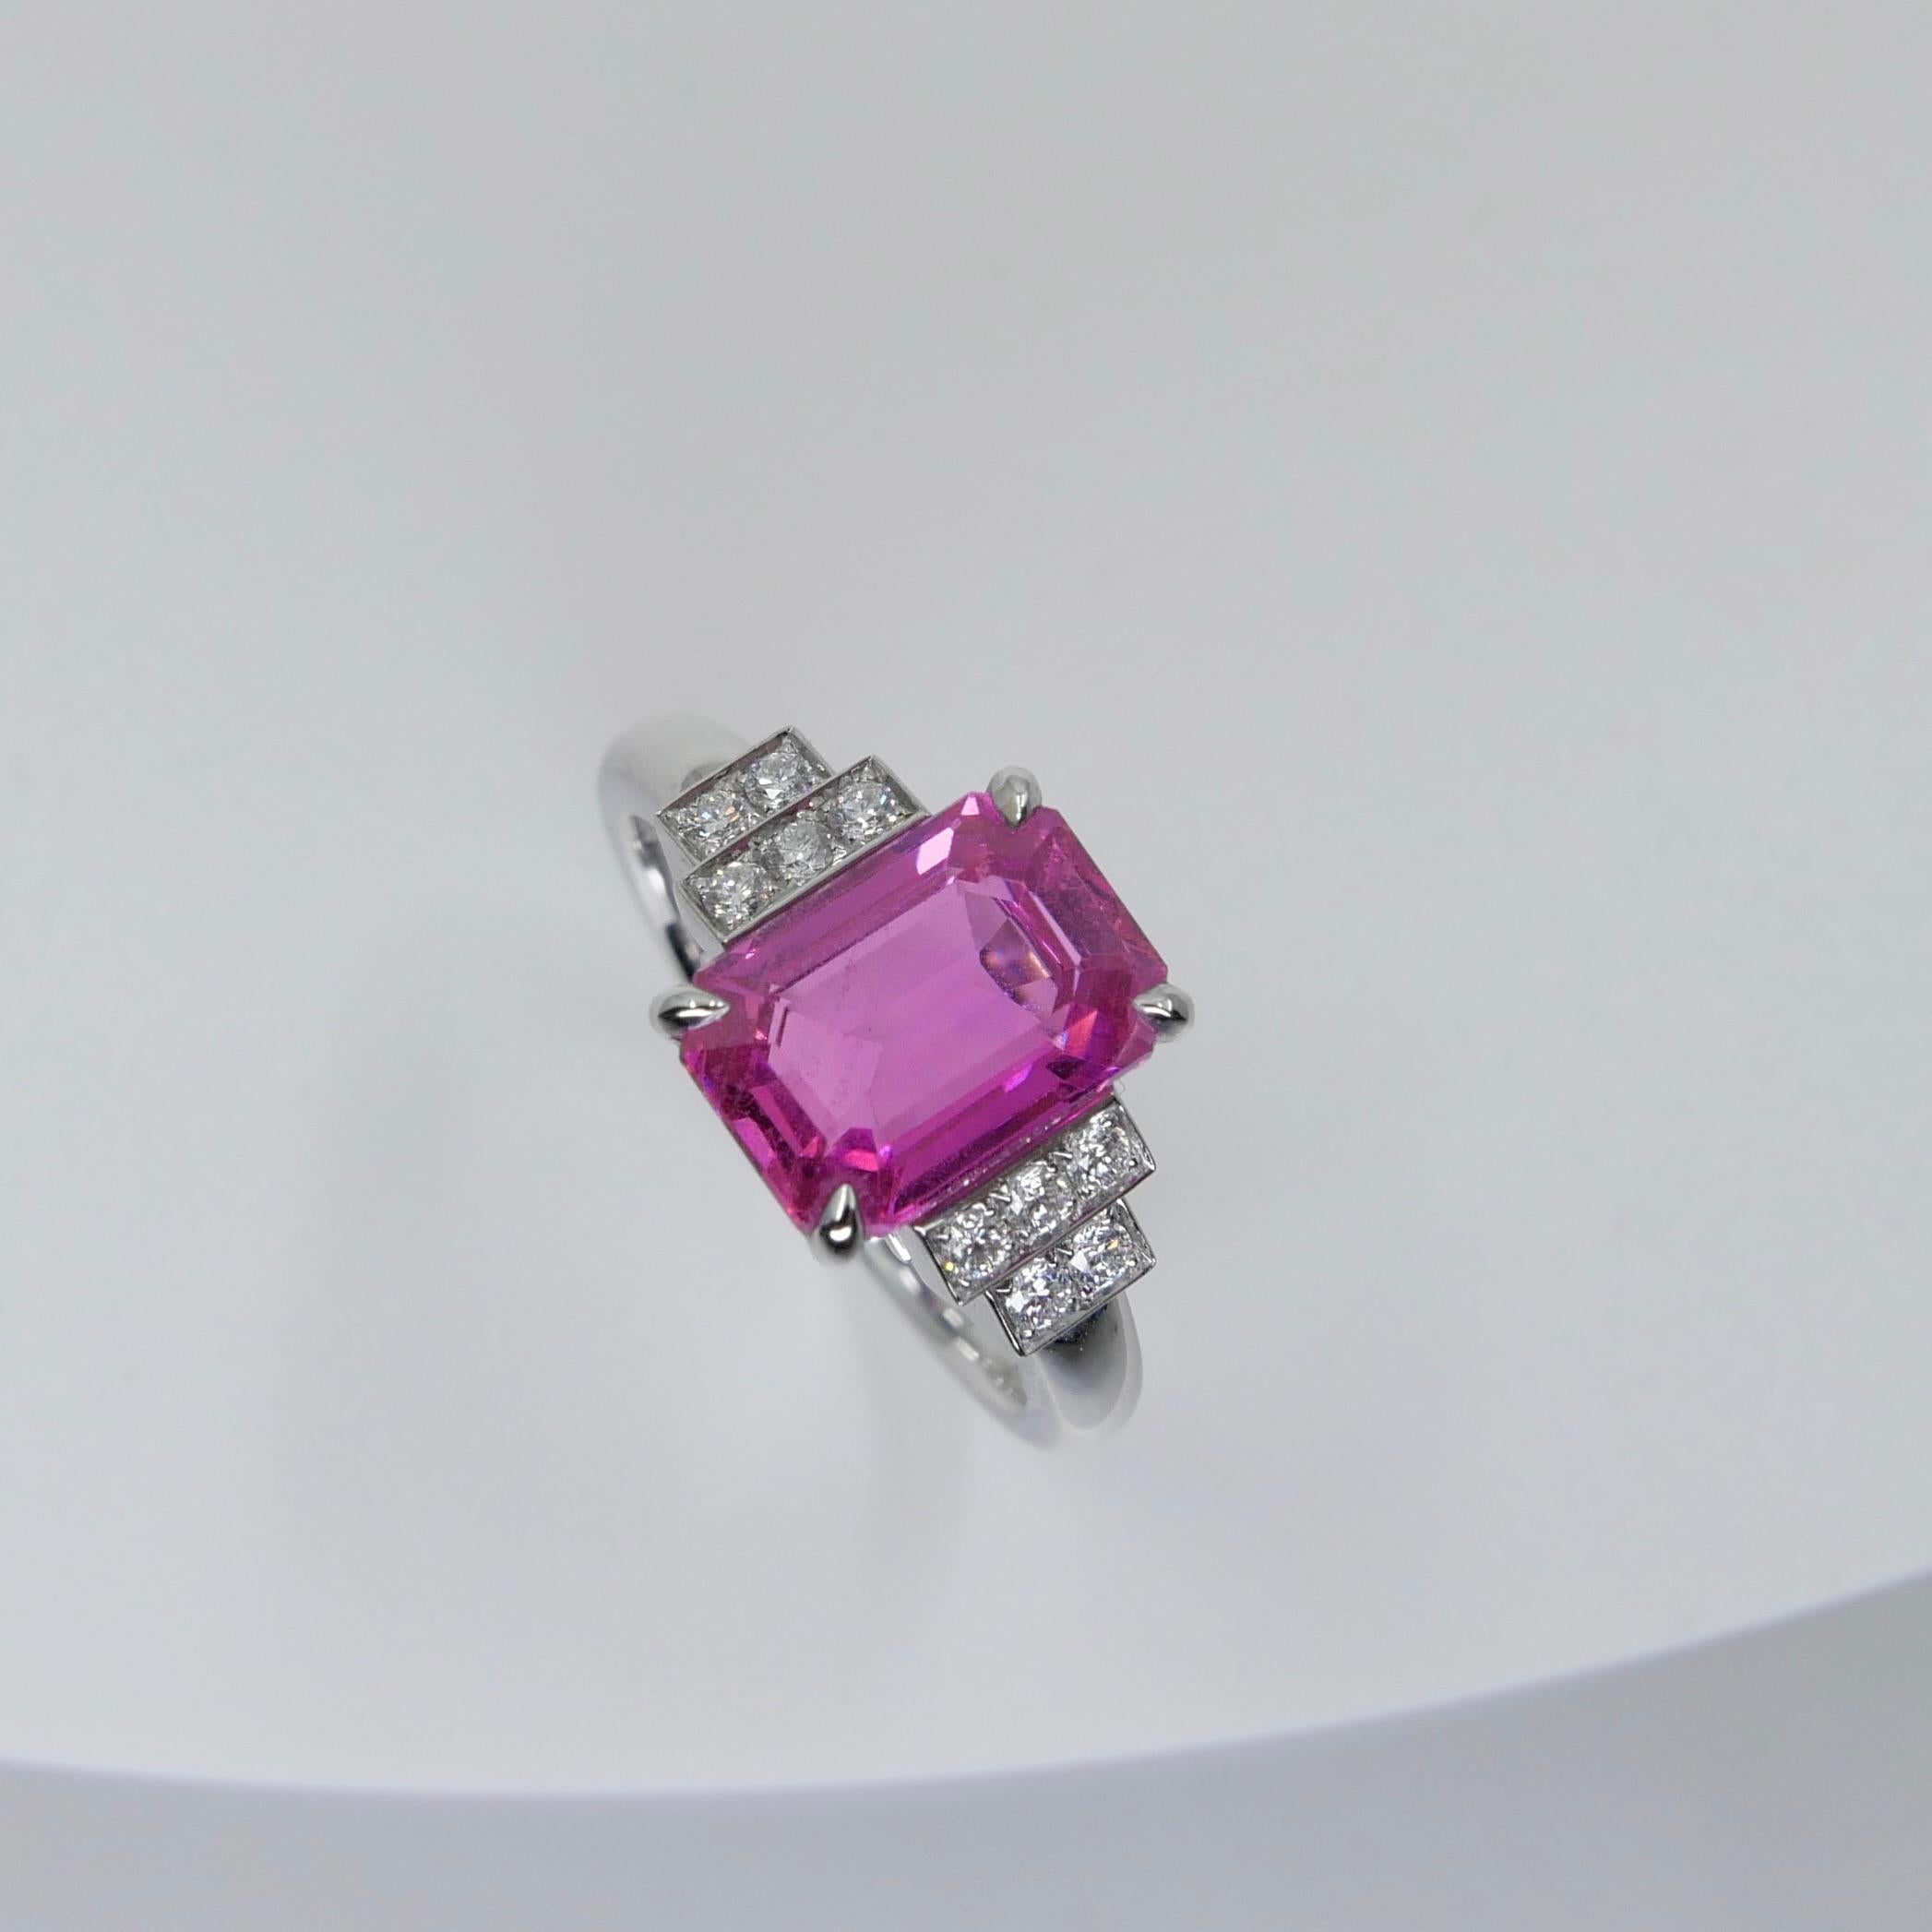 GRS Certified 3.11 Cts No Heat Pink Sapphire & Diamond Ring. Art Deco Style 1